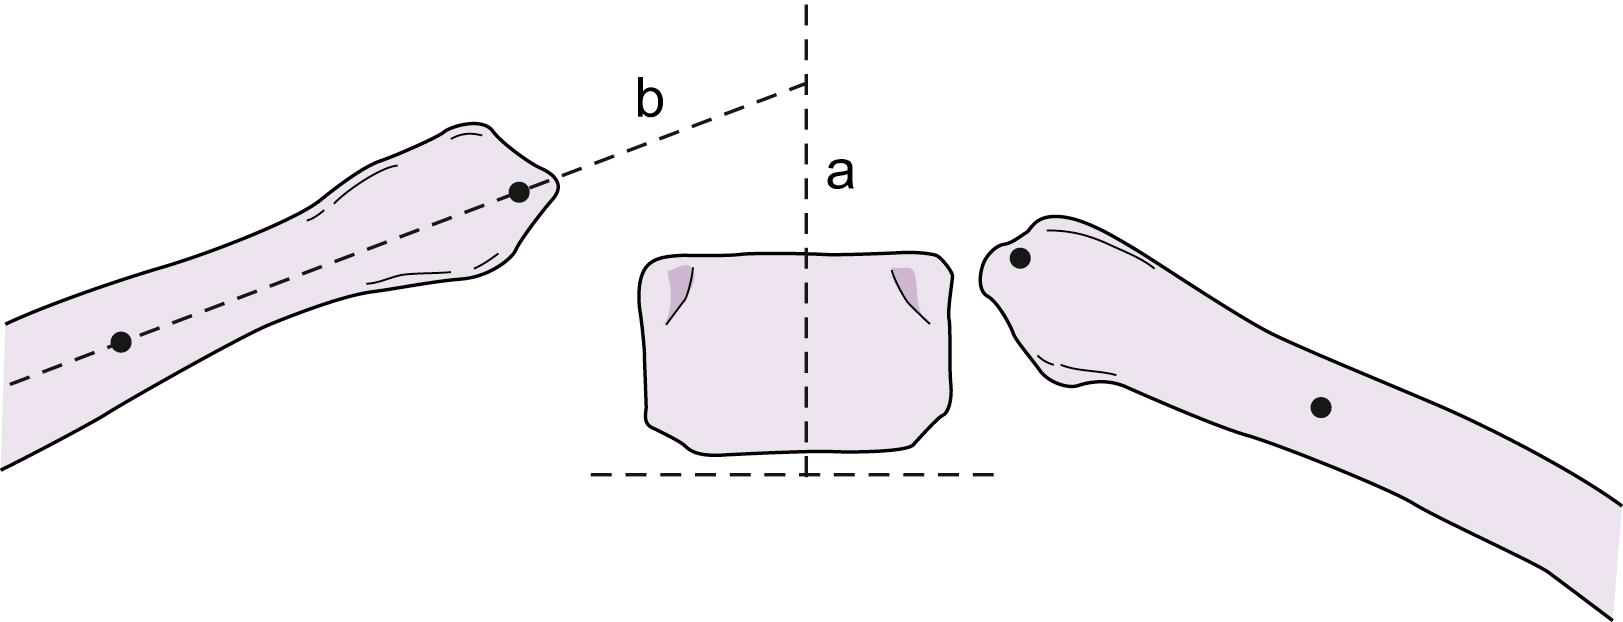 Fig. 20.3, Measuring the rib-vertebra angle difference (RVAD). A line is drawn perpendicular to the inferior end plate of the apical thoracic vertebra. Another line is drawn between two points that bisect the head and neck of the rib articulating with the apex. The angle between the perpendicular line ( a ) and the rib line ( b ) is measured. The same procedure is repeated for the rib on the opposite side. The concave–convex side angles are equal to the RVAD.